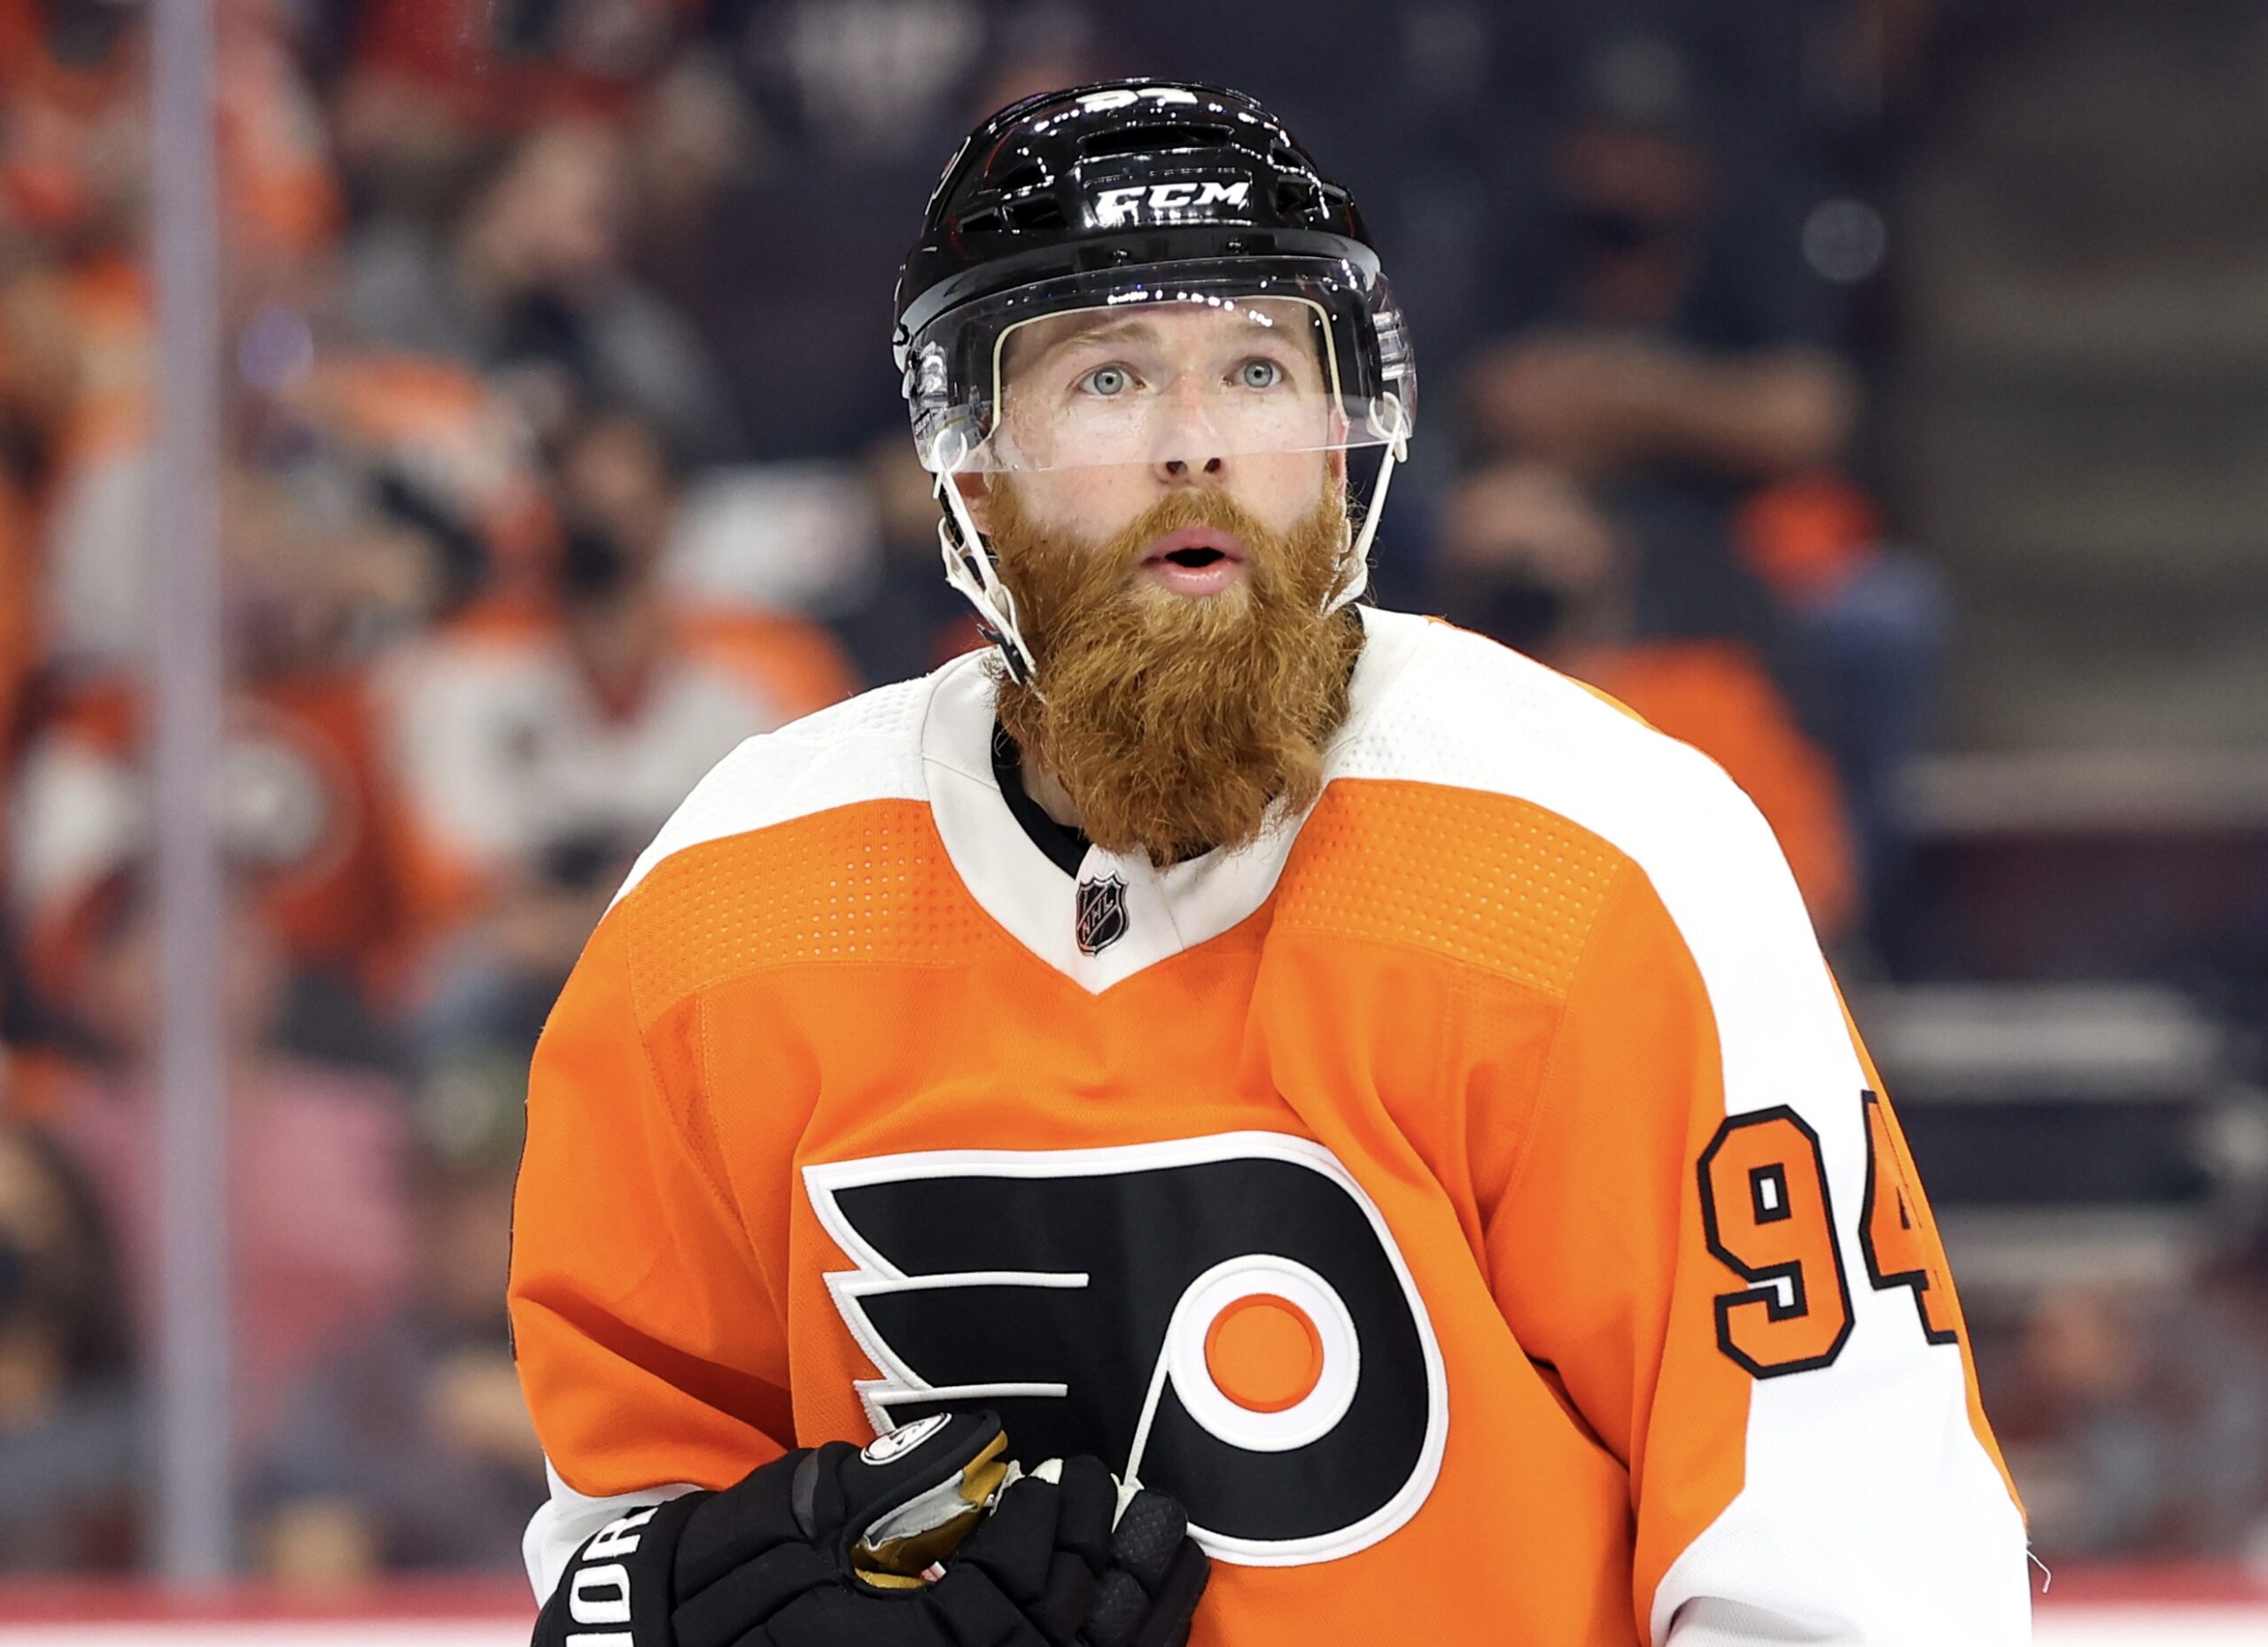 Ryan Ellis Likely to Miss the Start of the Season - Flyers Nation